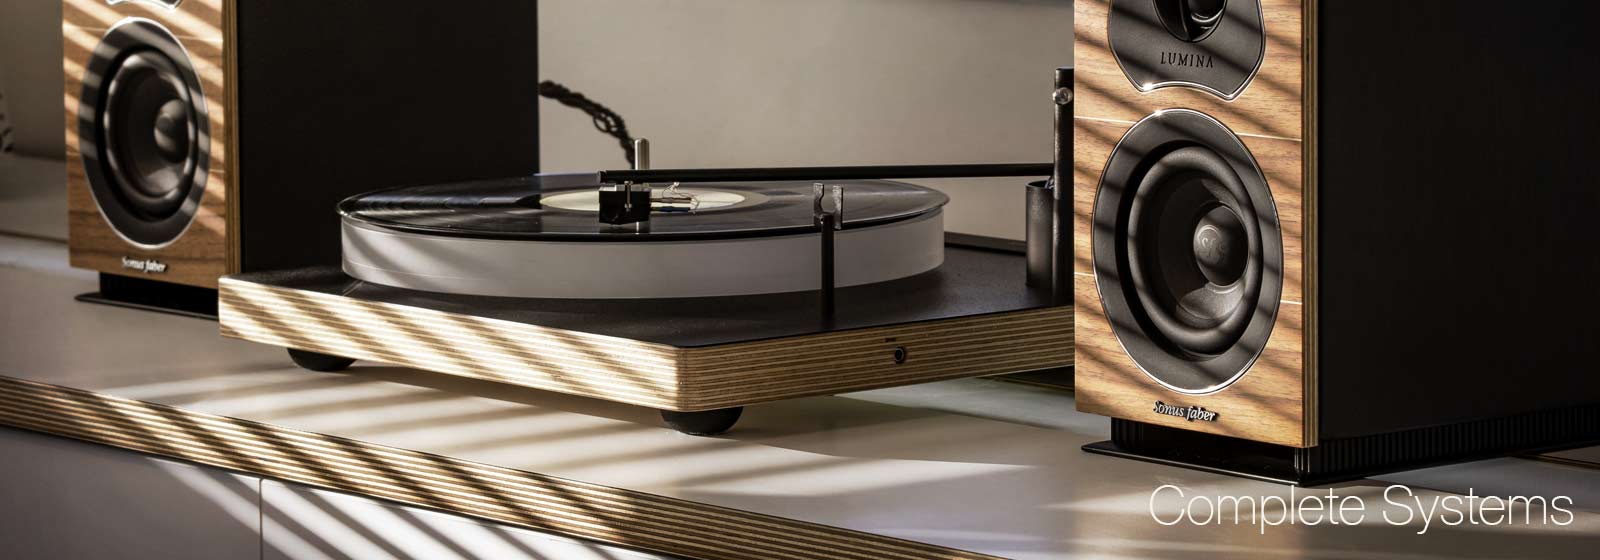 Complete hifi systems